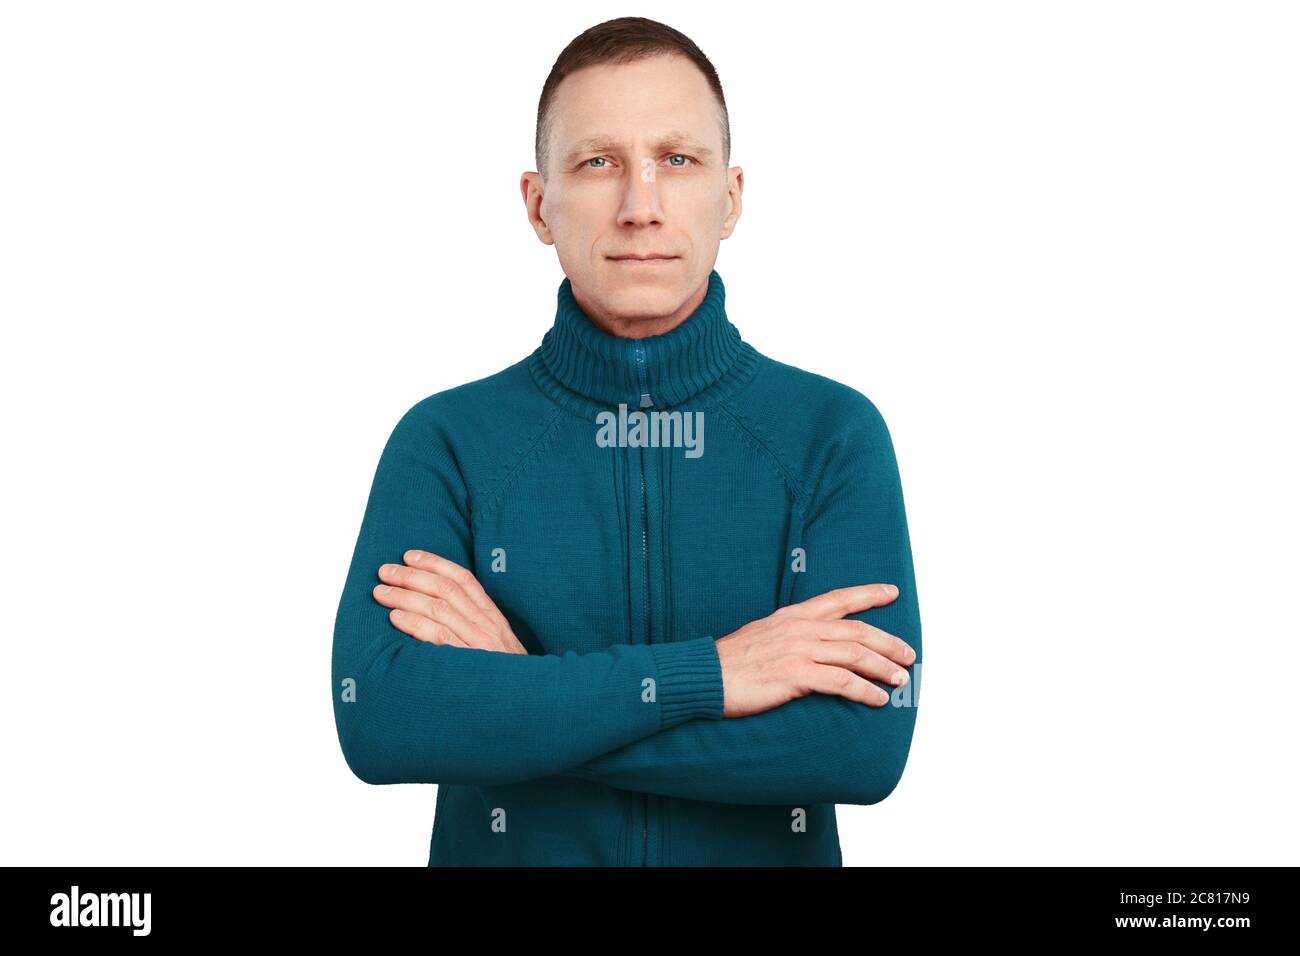 Serious average age man with crossed arms in blue sweater isolated on white background. Stock Photo